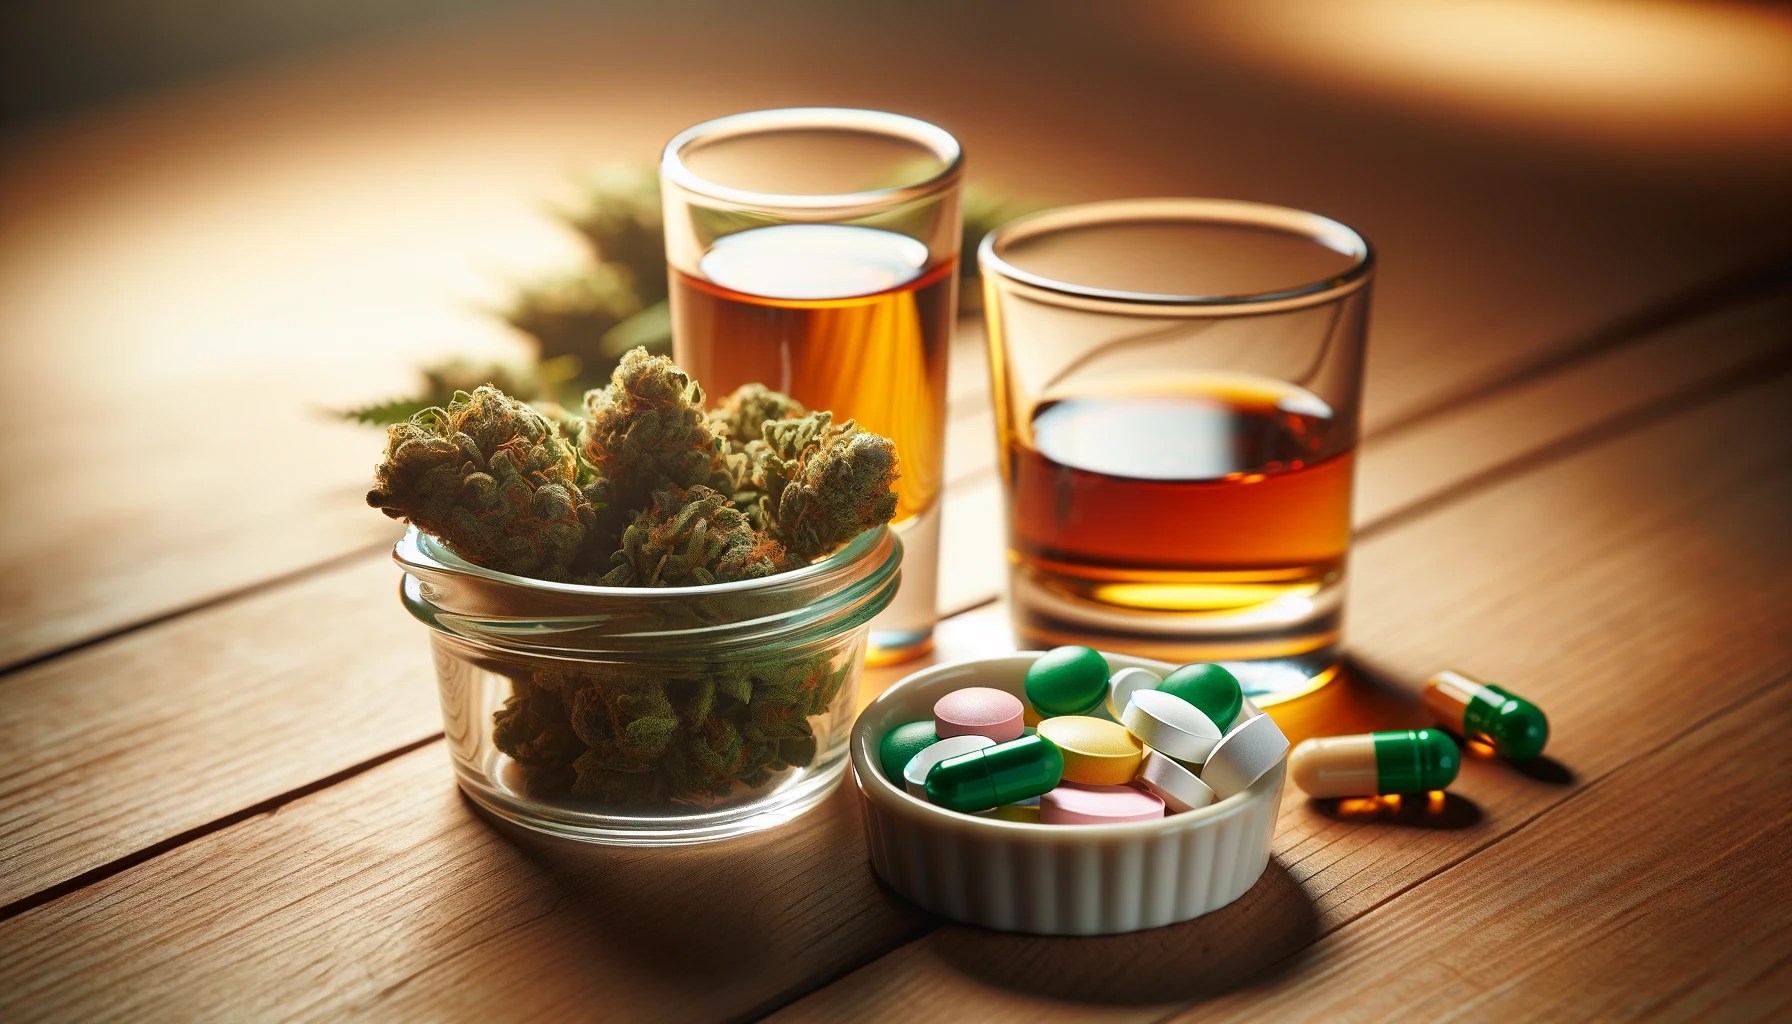 table_-a-small-open-glass-jar-filled-with-green-cannabis-buds-a-clear-shot-glass-half-filled-with-alcohol